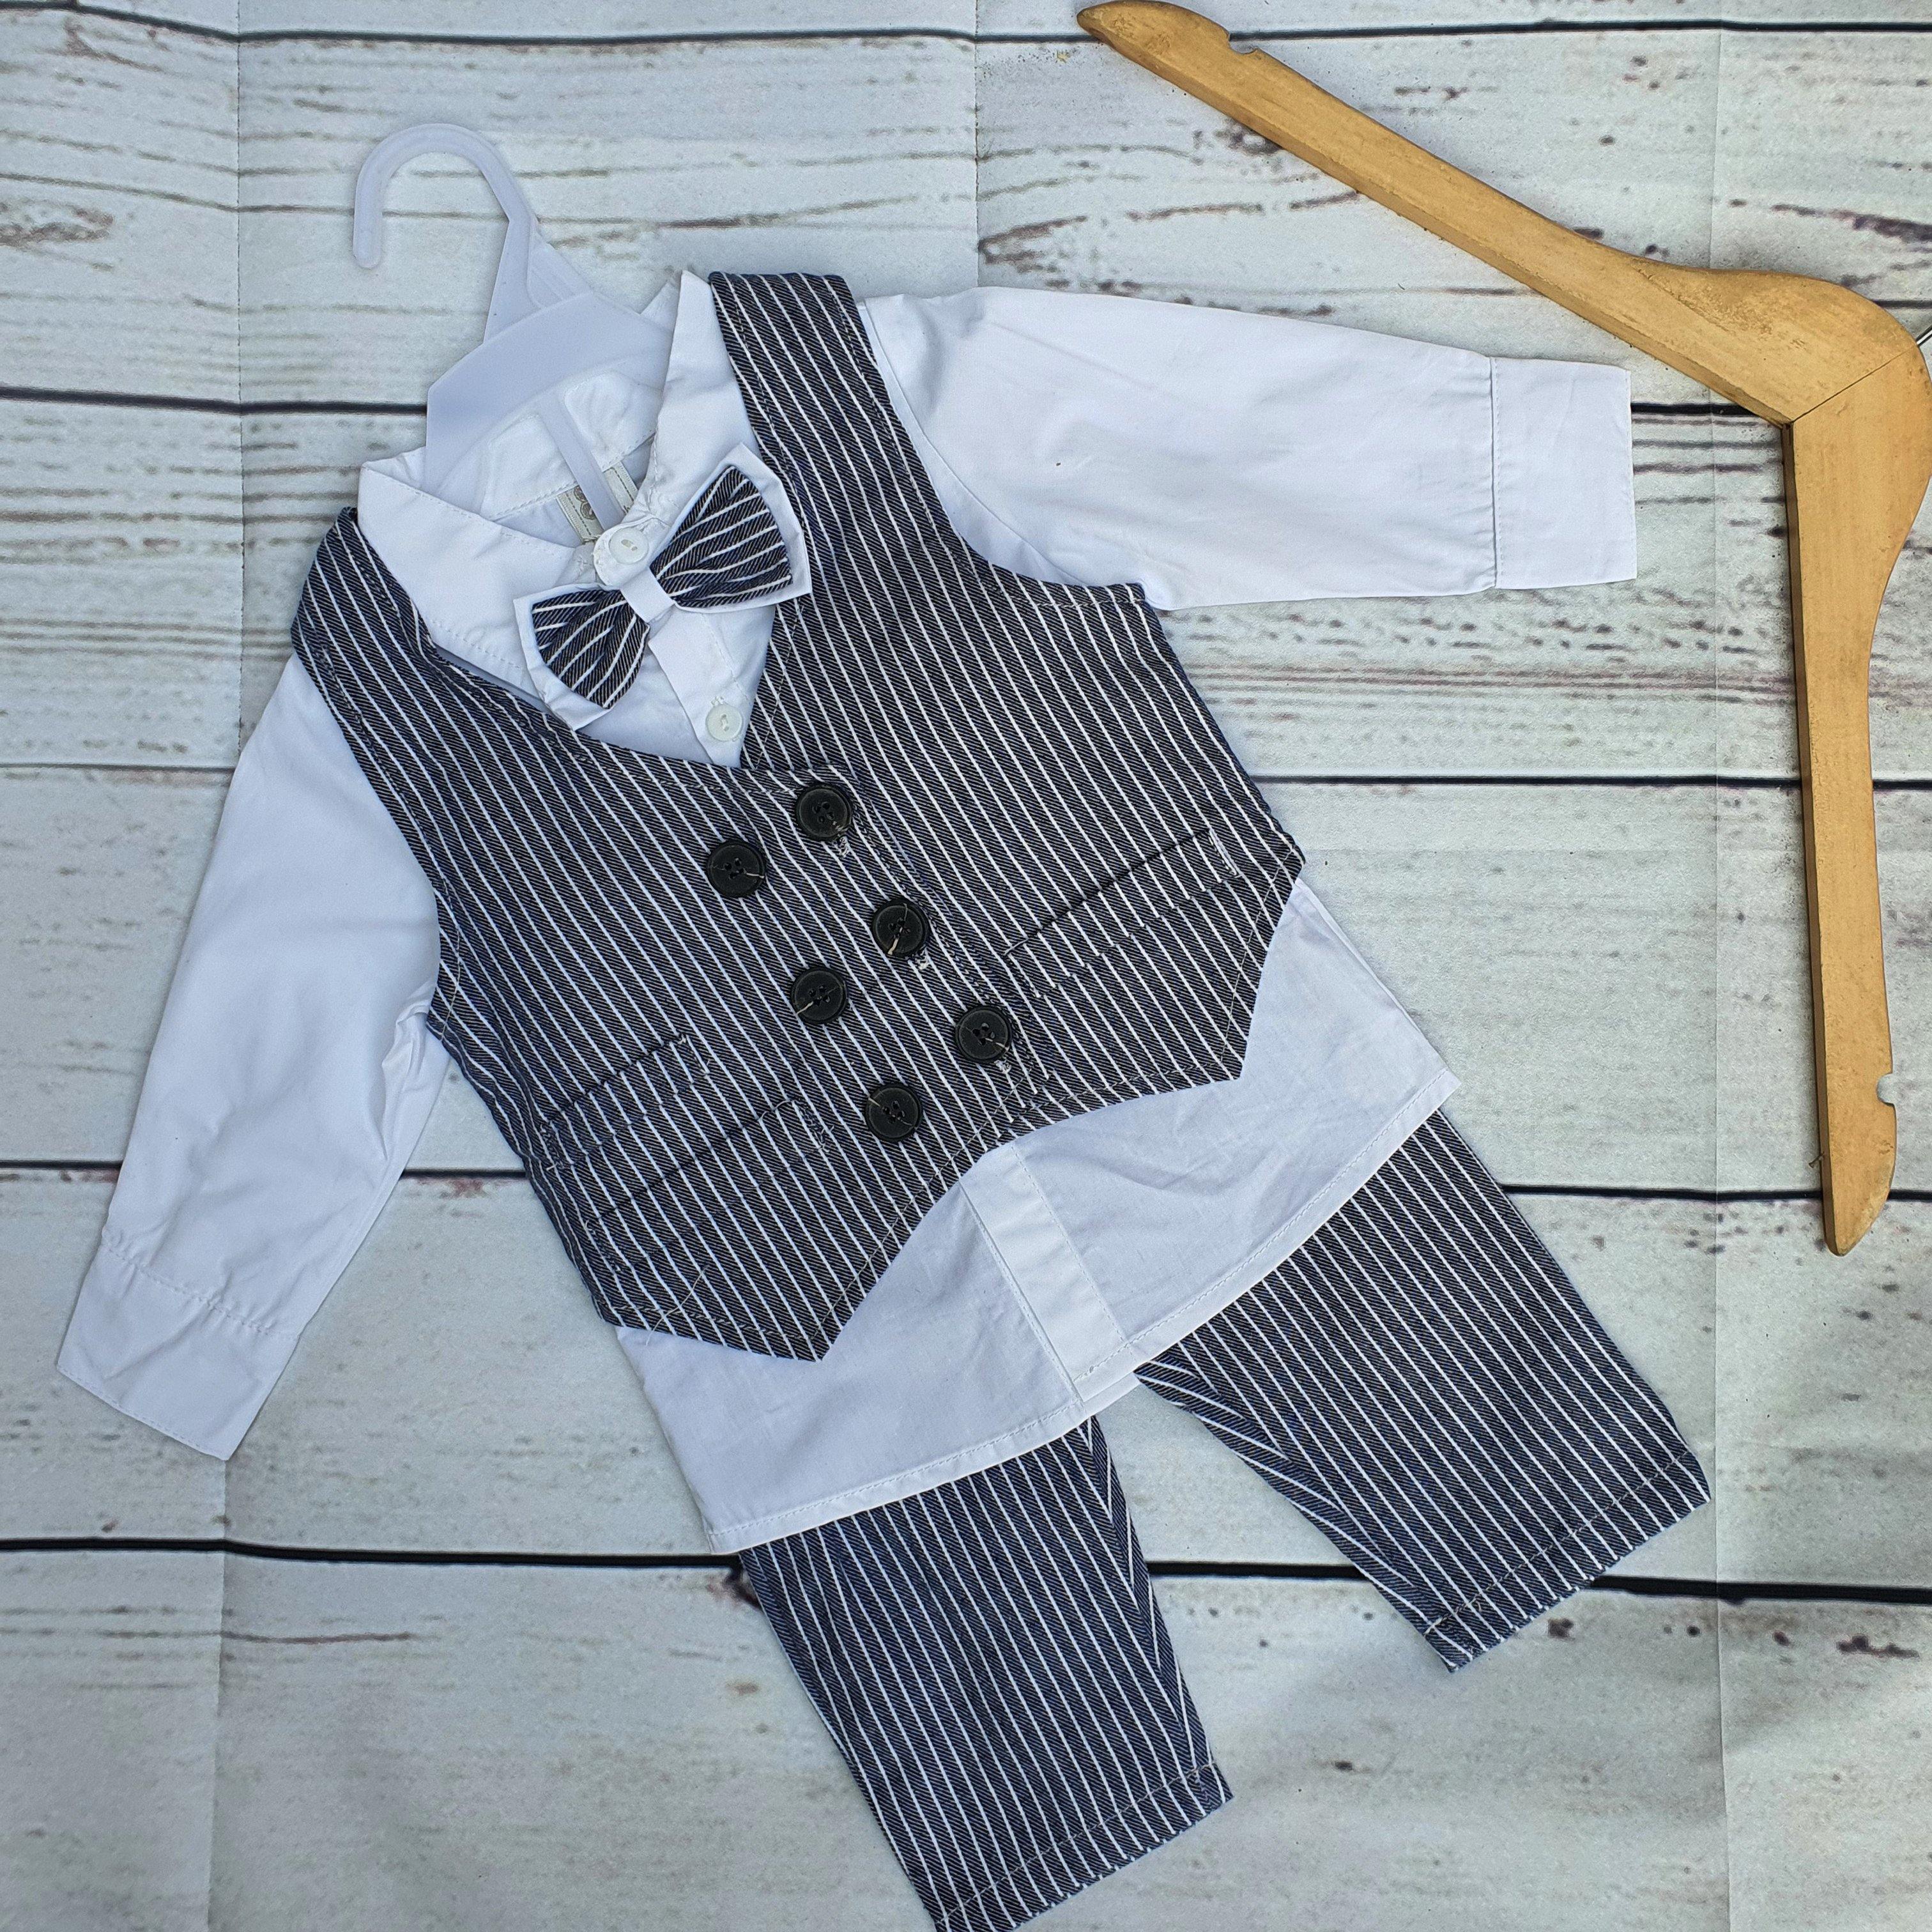 Sky Blue Formal Suit For Baby Boy Costume 3 Piece Suit - Italiano.pk